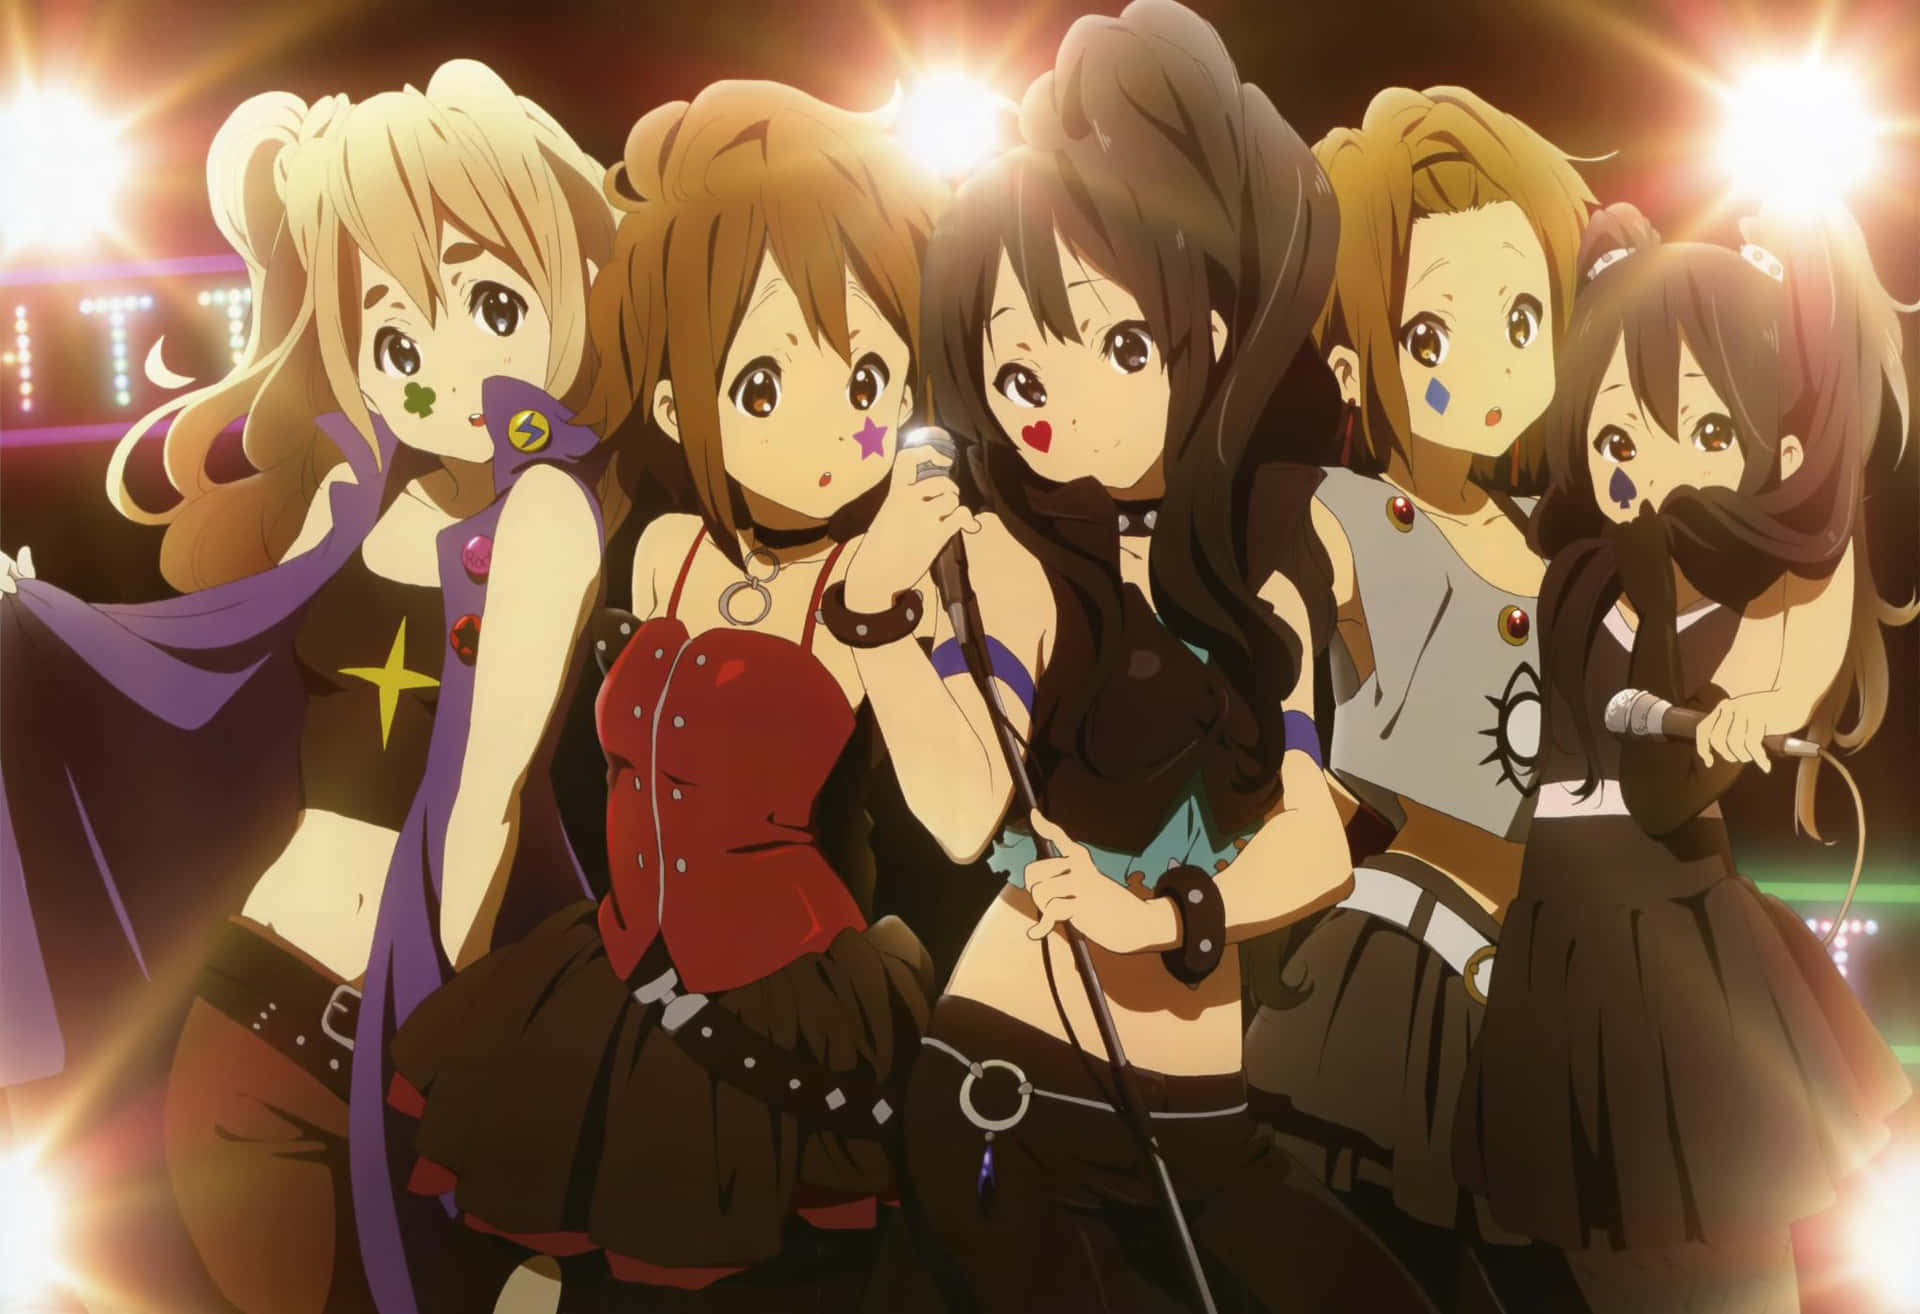 A Group Of Anime Girls Standing In Front Of A Light